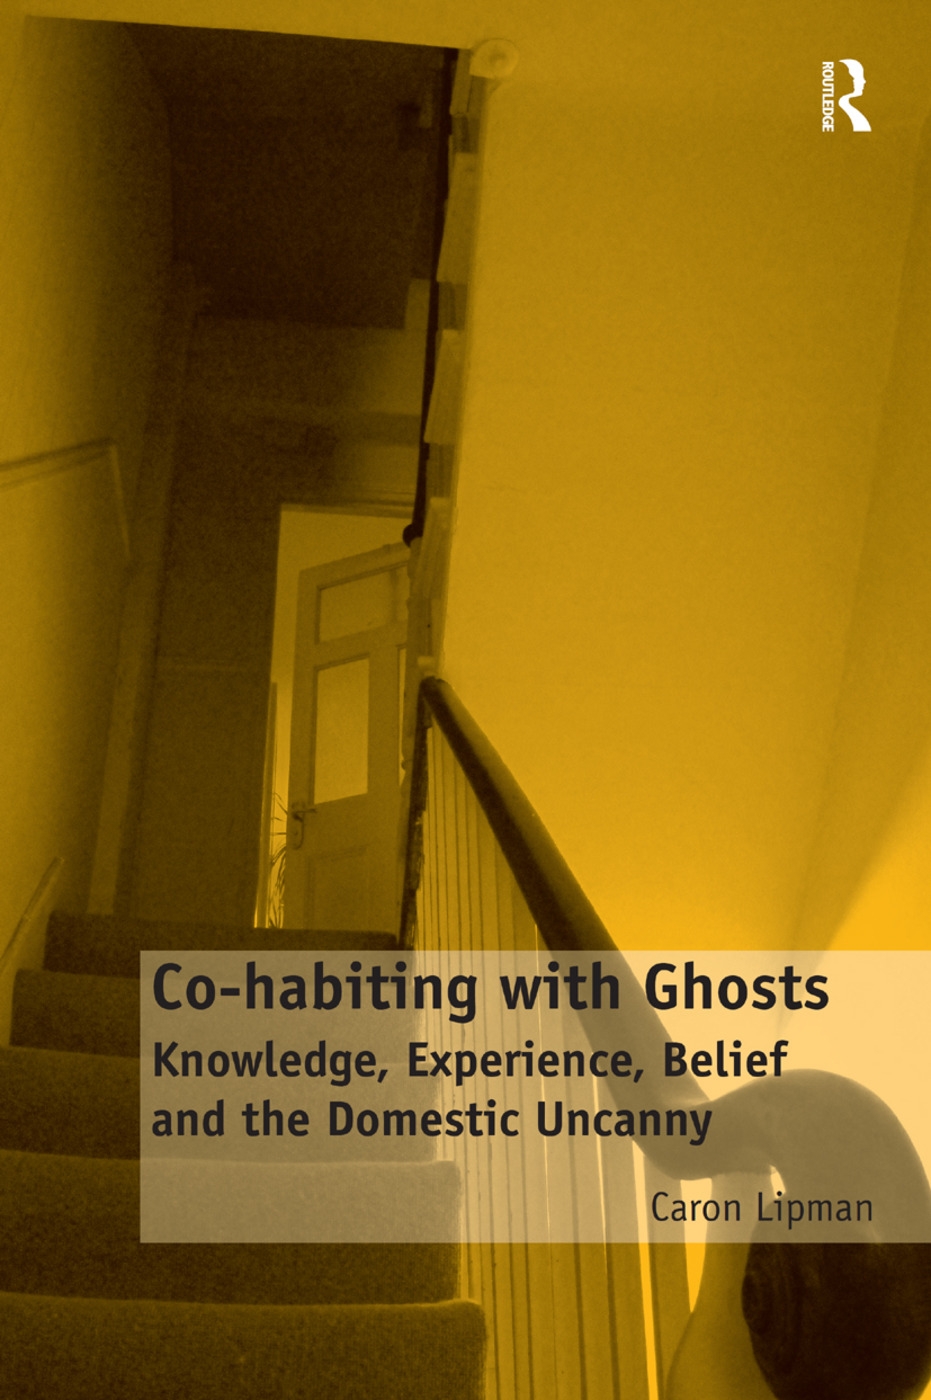 Co-Habiting with Ghosts: Knowledge, Experience, Belief and the Domestic Uncanny. by Caron Lipman